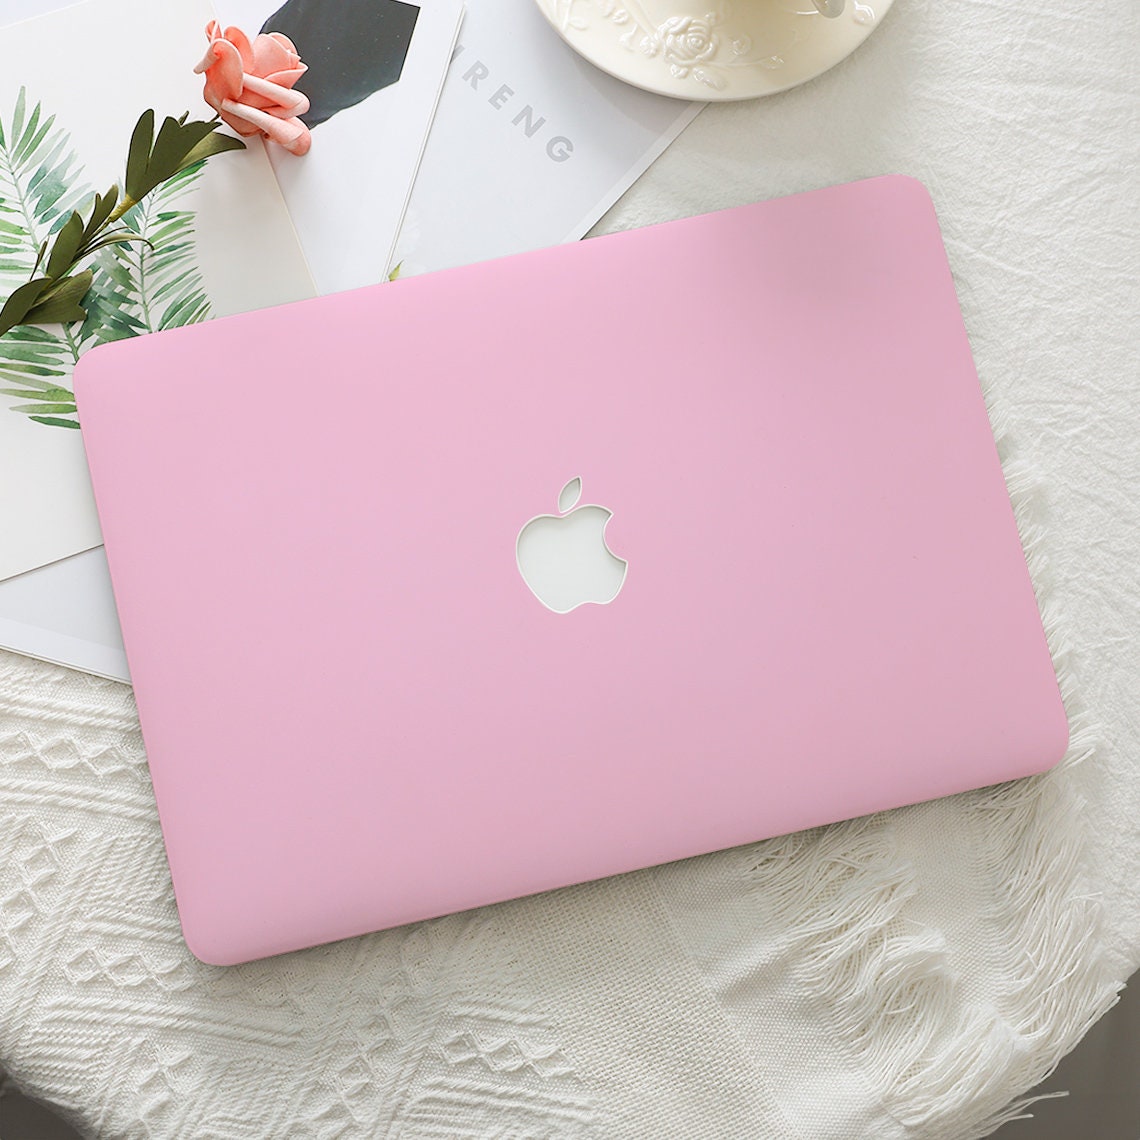 Rubberized Matte Case Cover For New MacBook Air Pro Retina + Silicone KB  Cover